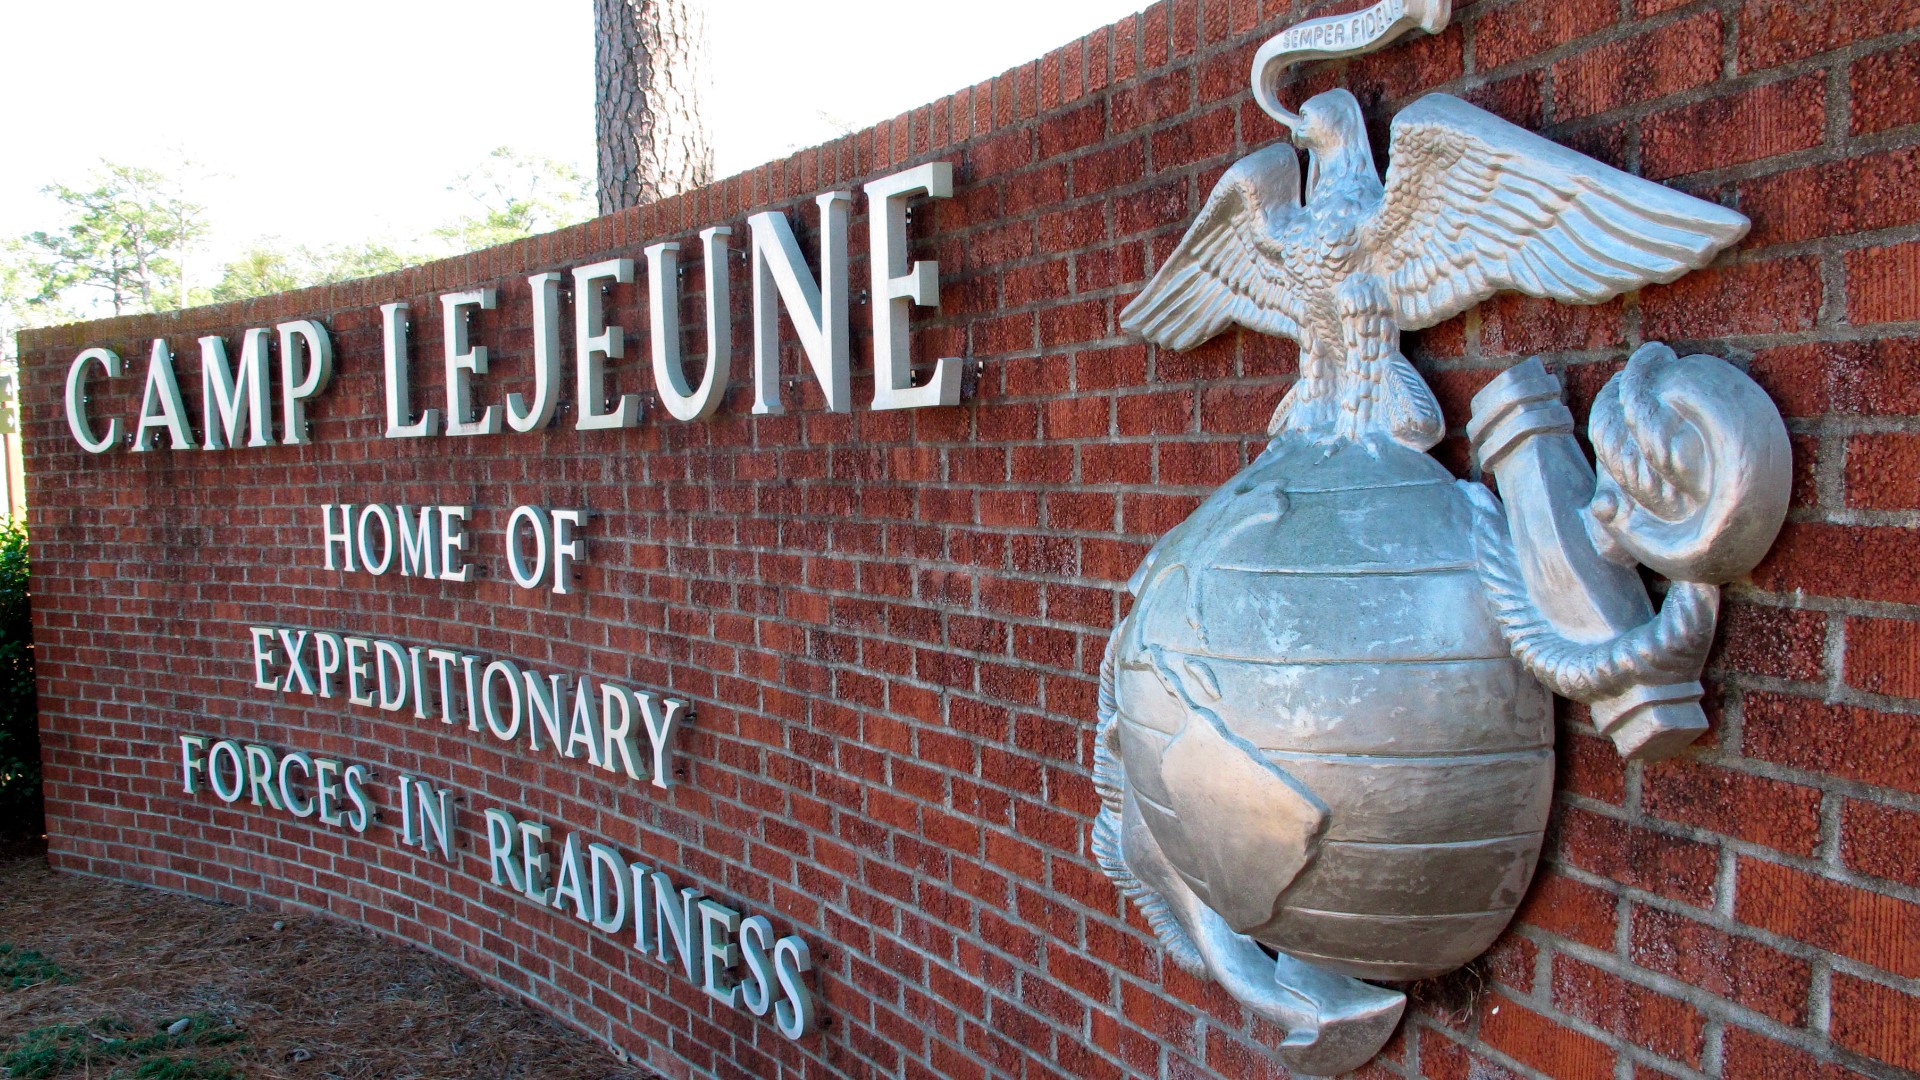 In a statement from the base, officials said that around 10:15 p.m. Wednesday base law enforcement 'apprehended' a Marine for involvement in another Marine's death.